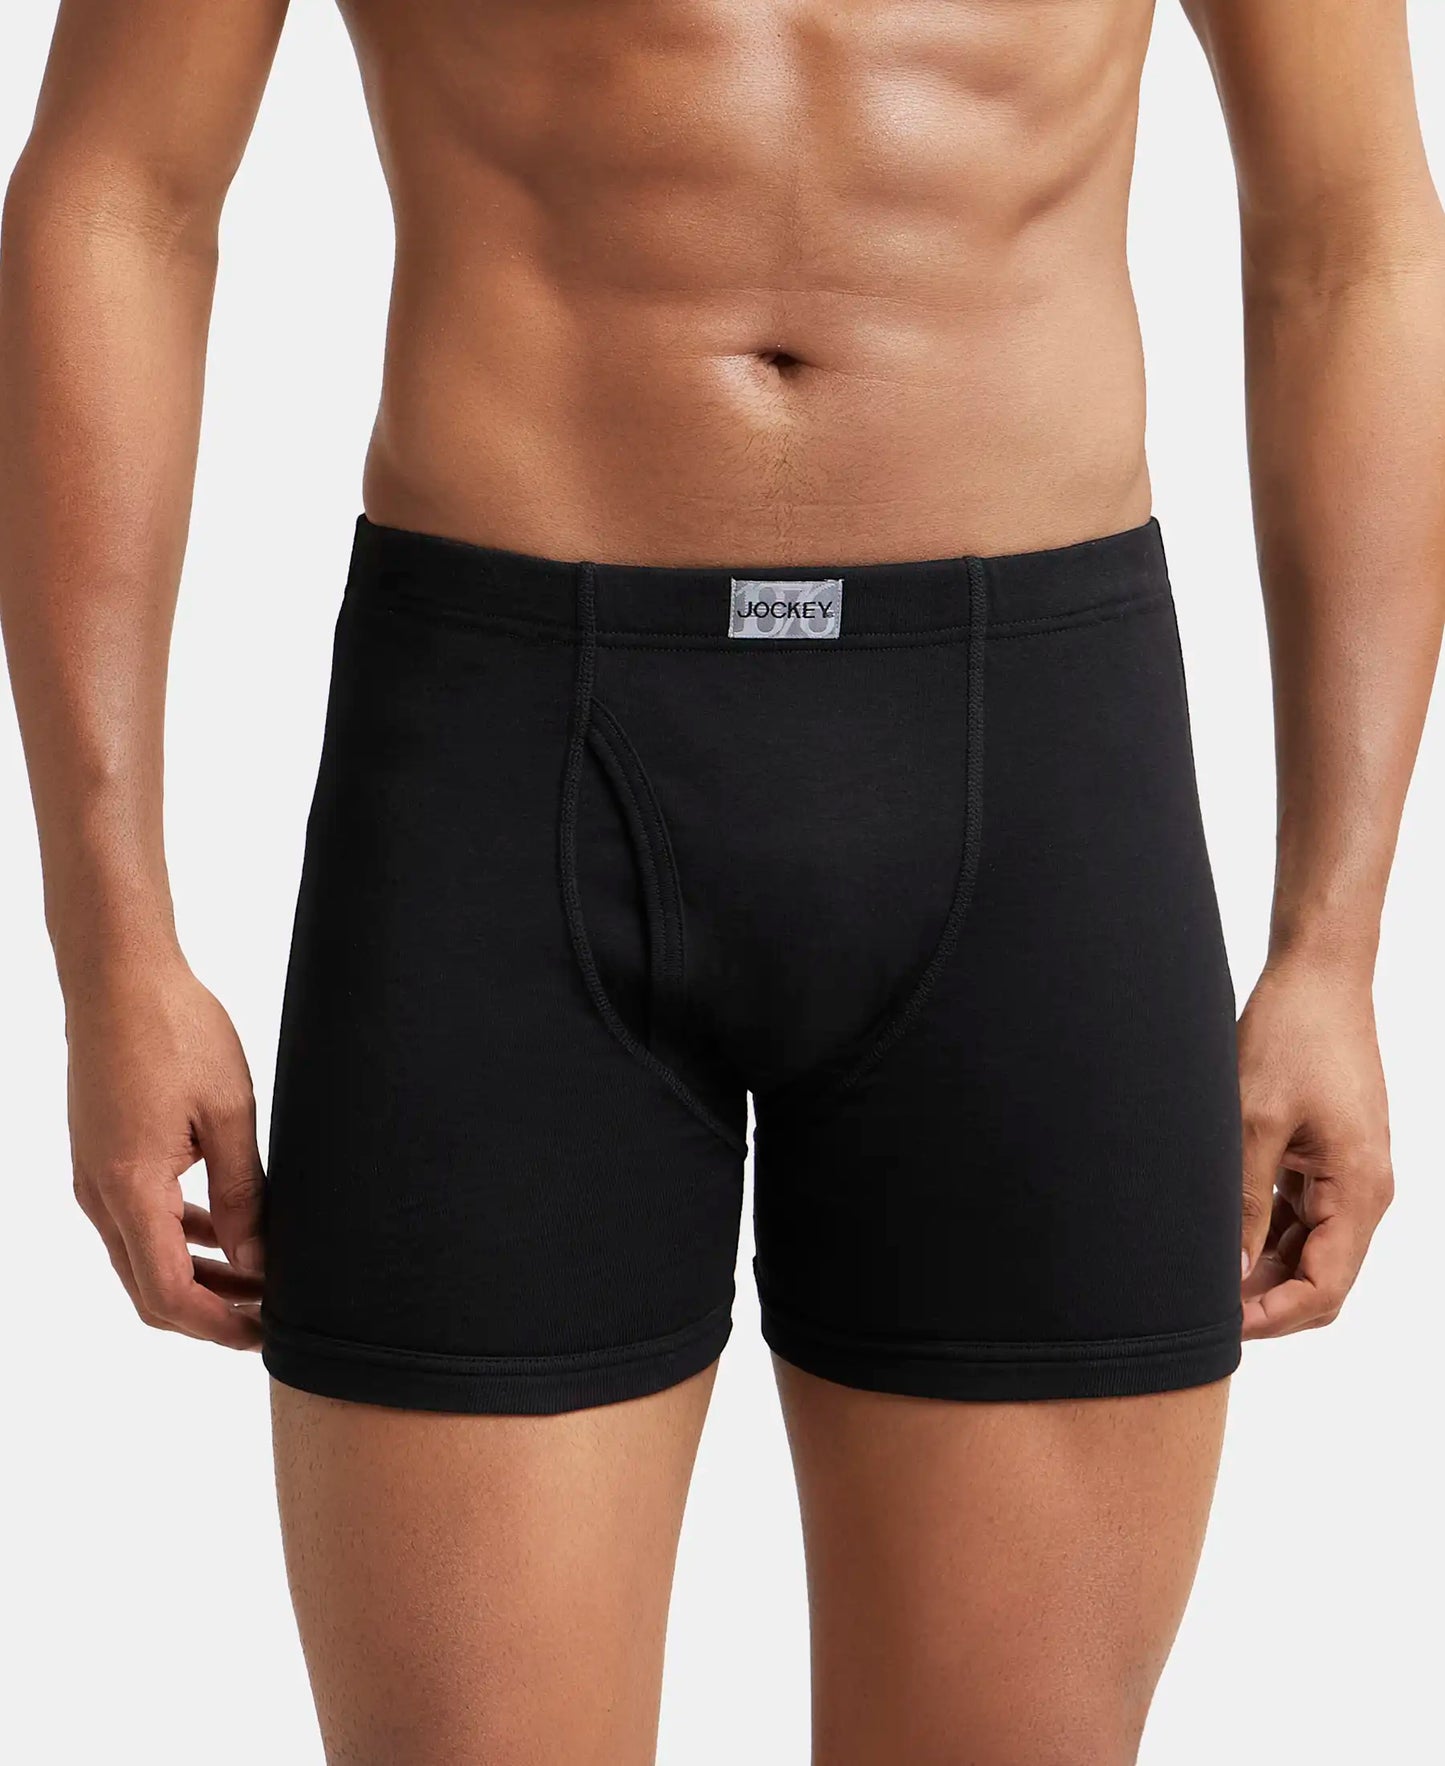 Super Combed Cotton Rib Solid Boxer Brief with Ultrasoft and Durable Waistband - Black/Charcoal Melange/Grey Melange (Pack of 3)-2